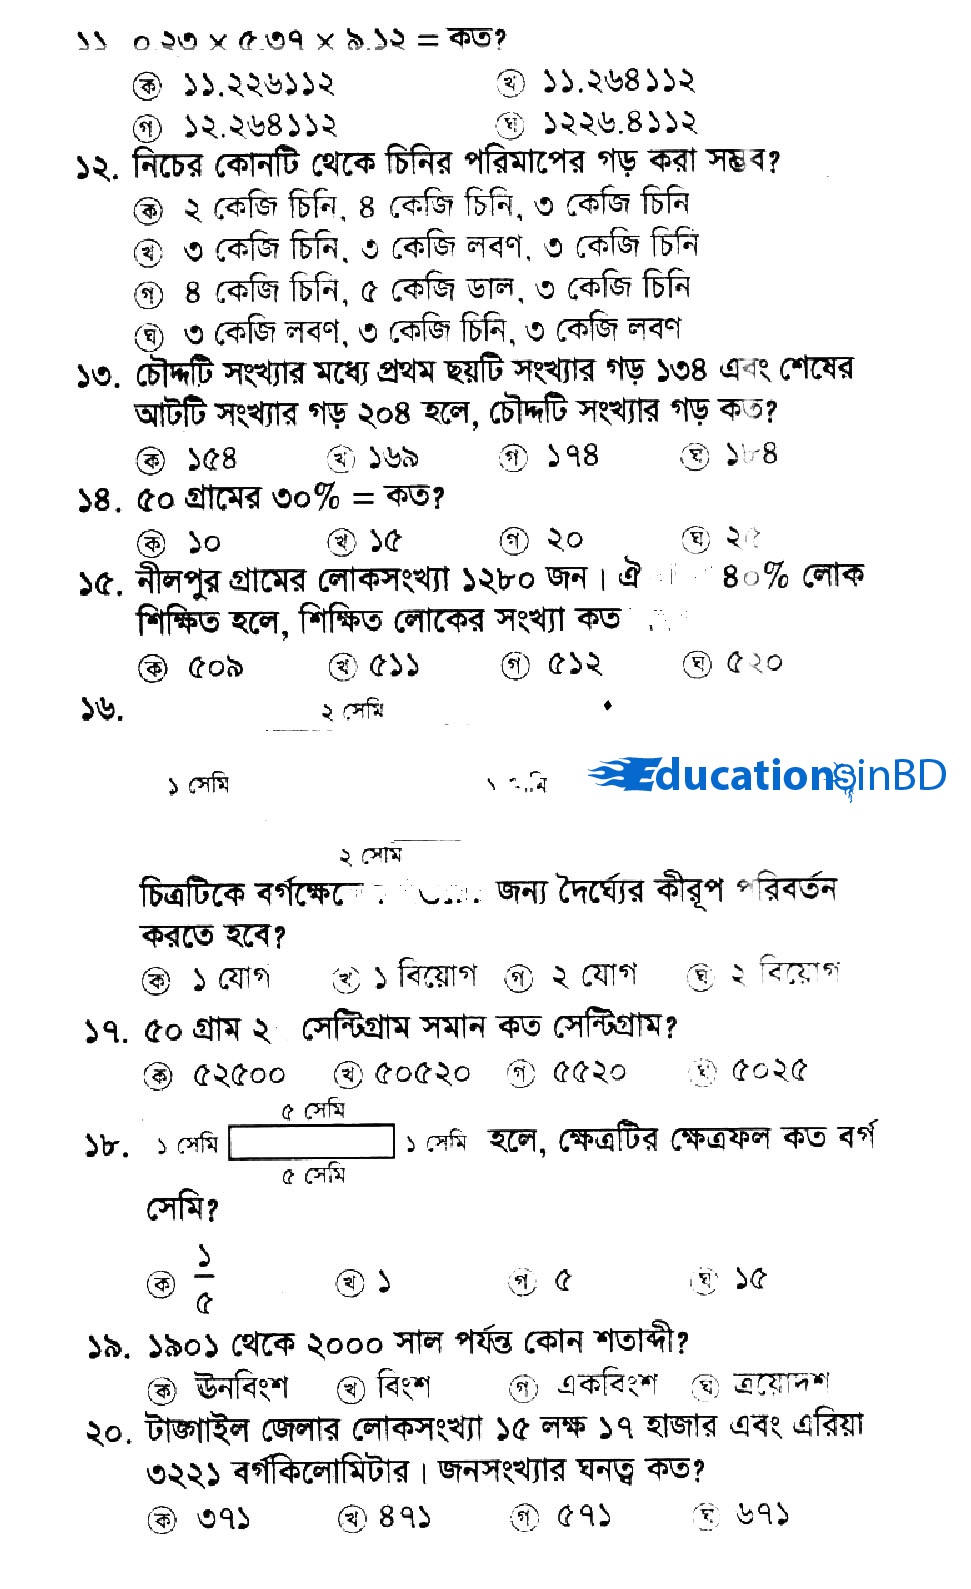 PSC Math Suggestion 2018 All Education Board